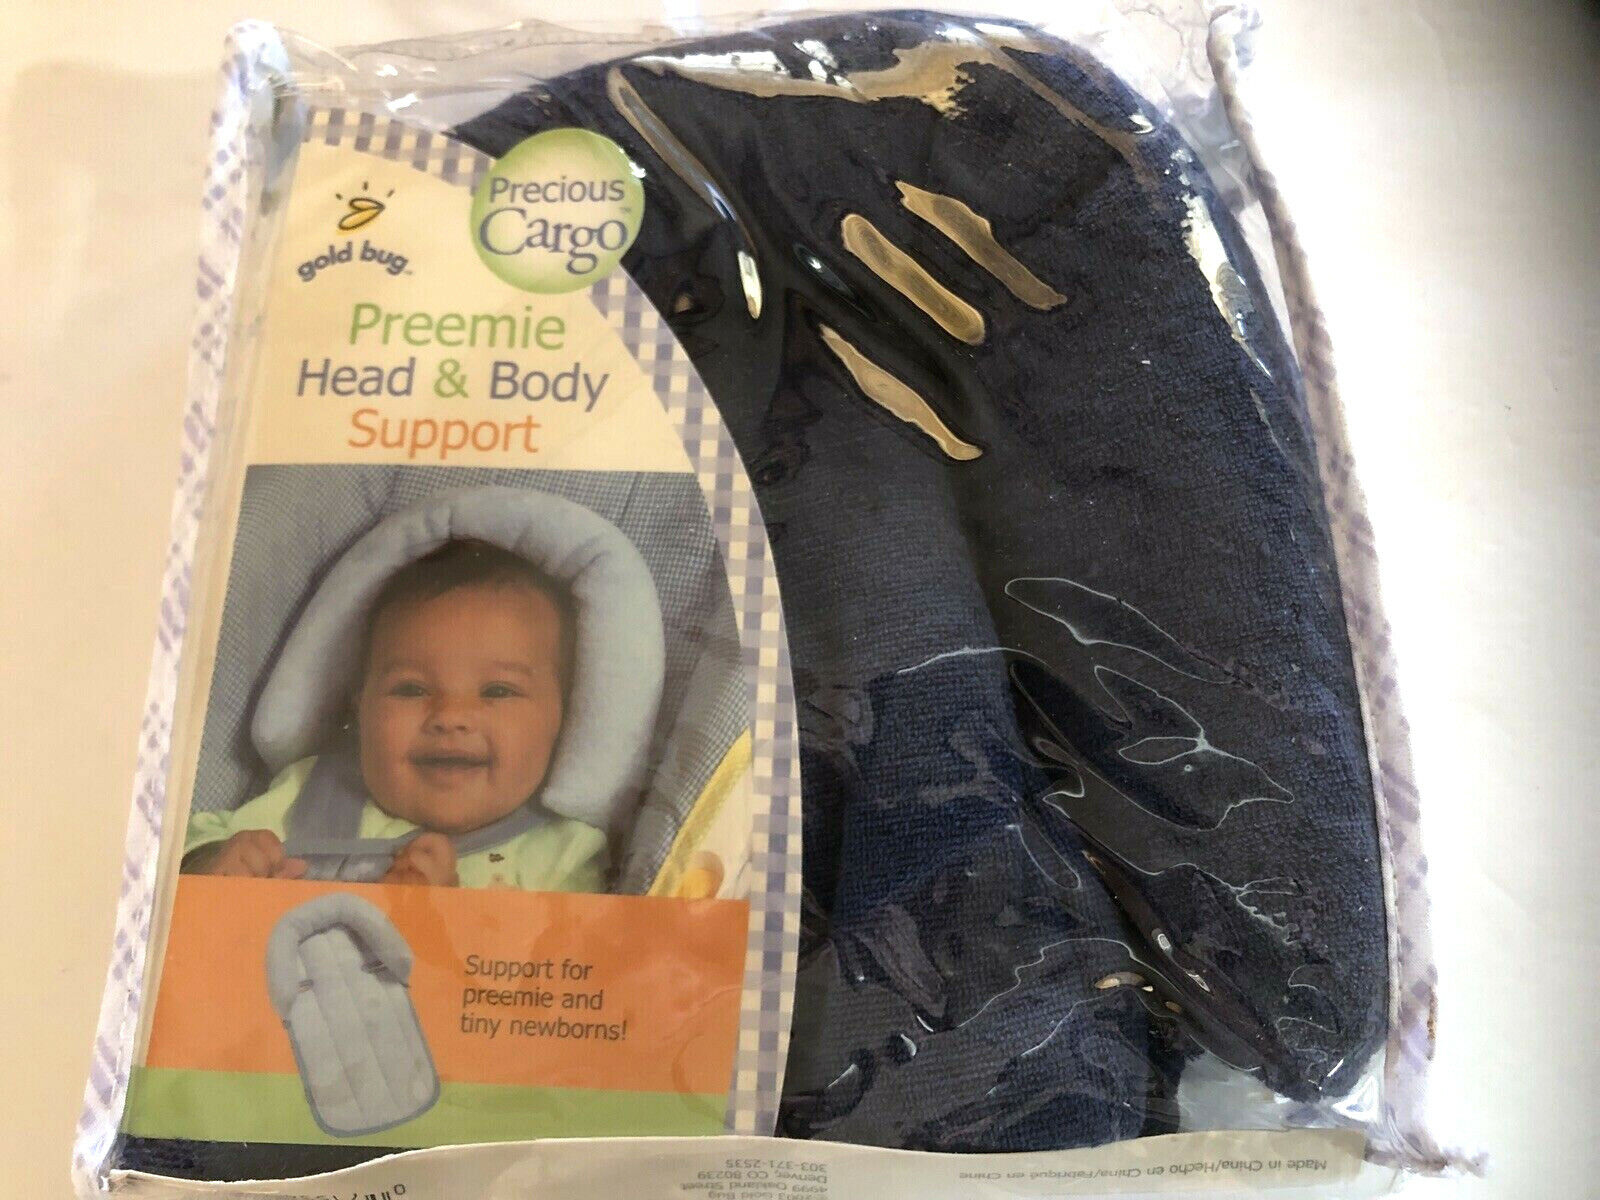 Nuby Baby Carrier/ Stroller Full Cover Mesh Netting& Preemie Head Support Lot Nûby/Precious Cargo 52879